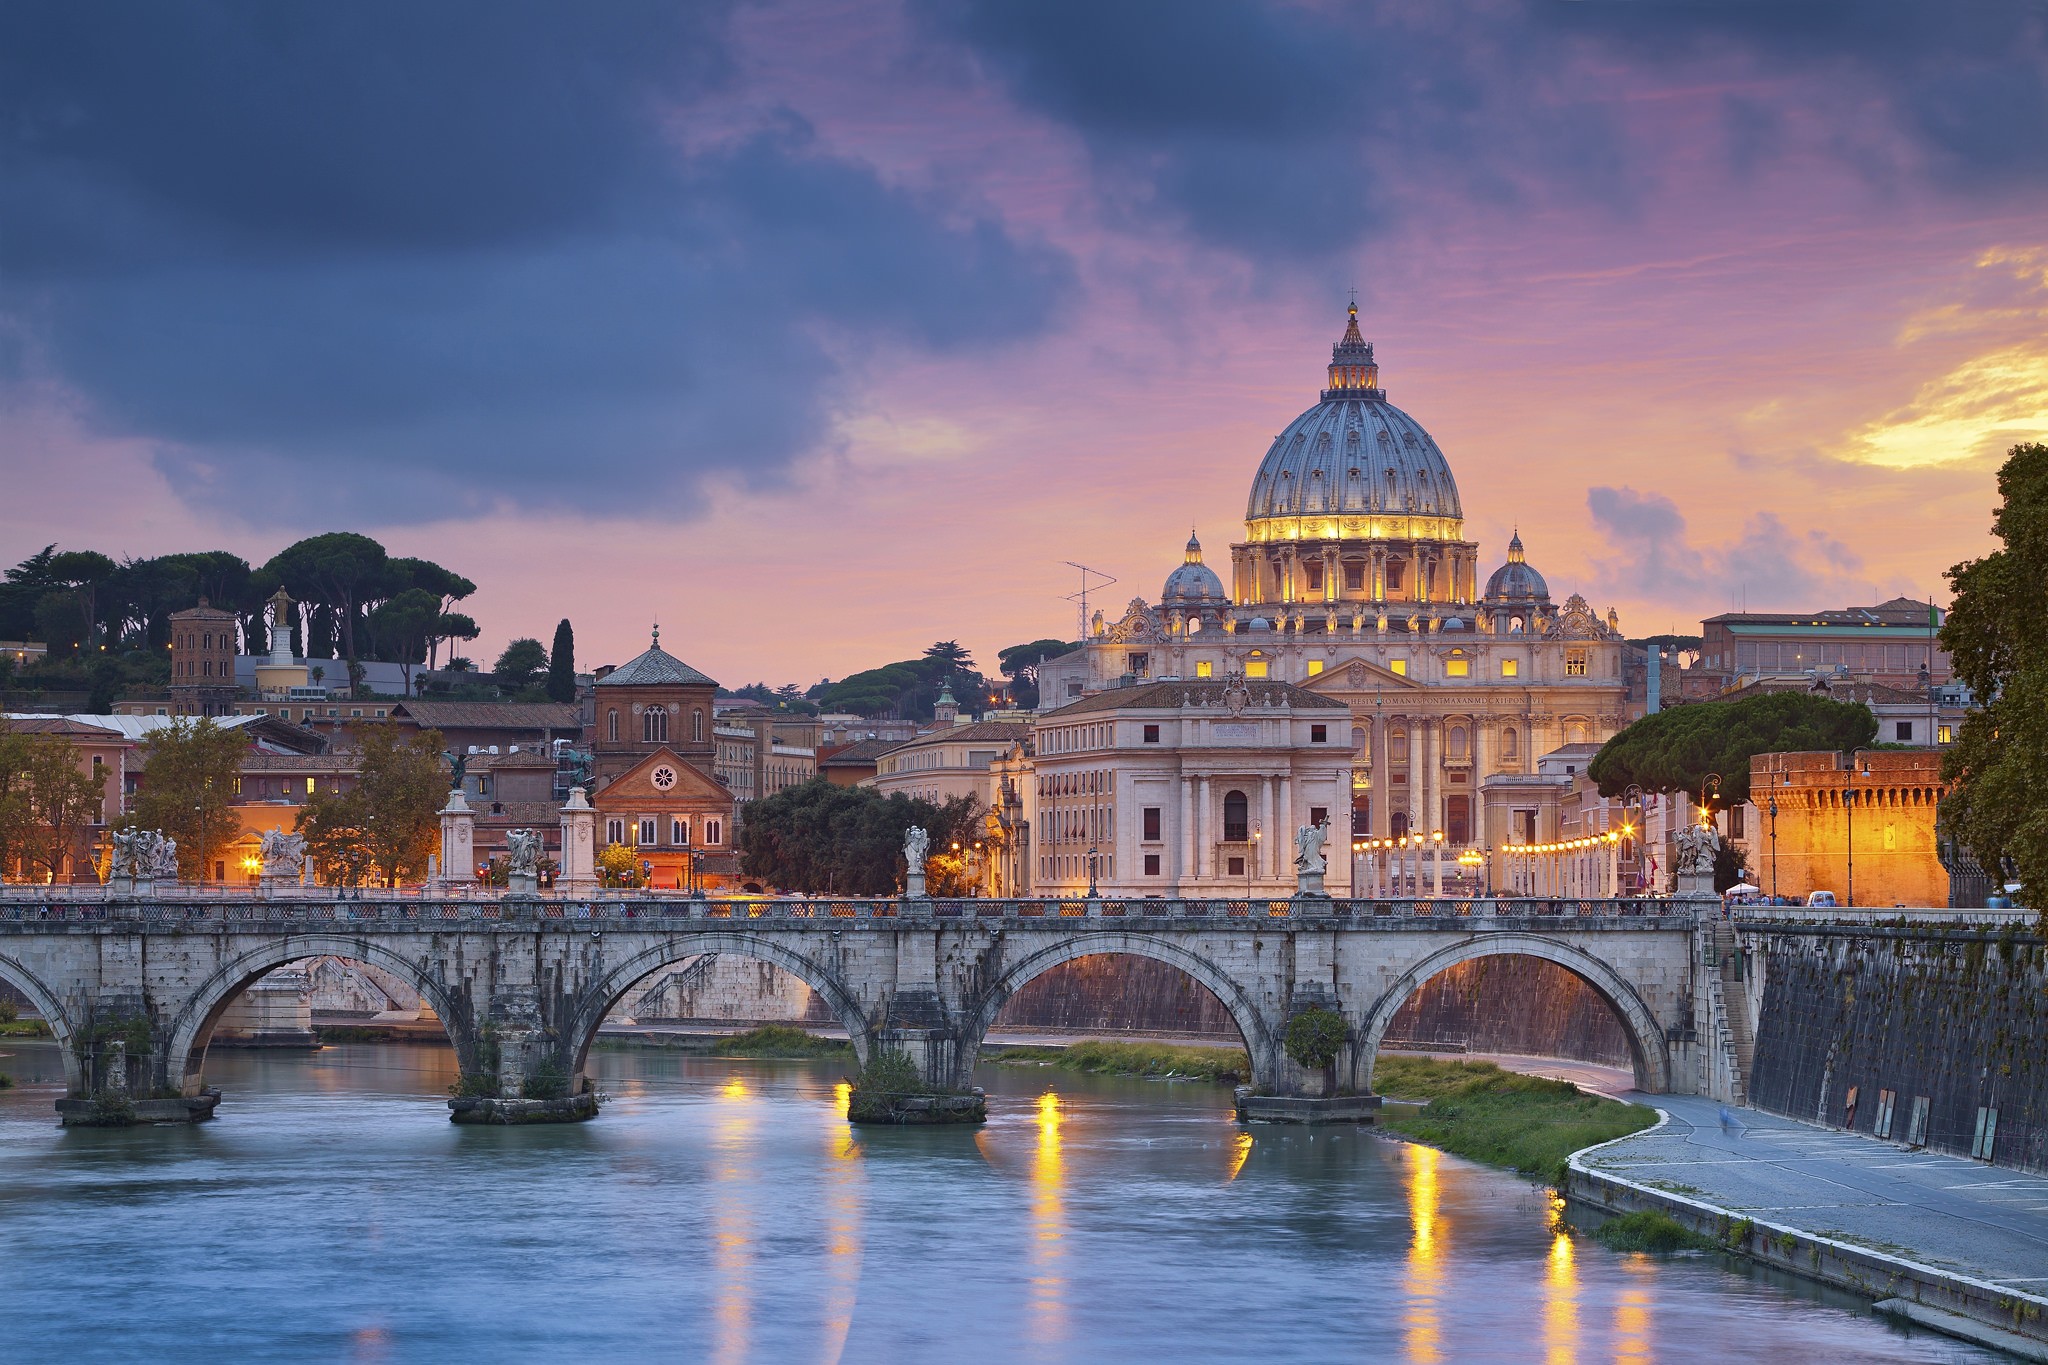 Rome Italy Vatican City Cathedral Church River Bridge Evening Lights Sky Clouds Building Old Buildin 2048x1365